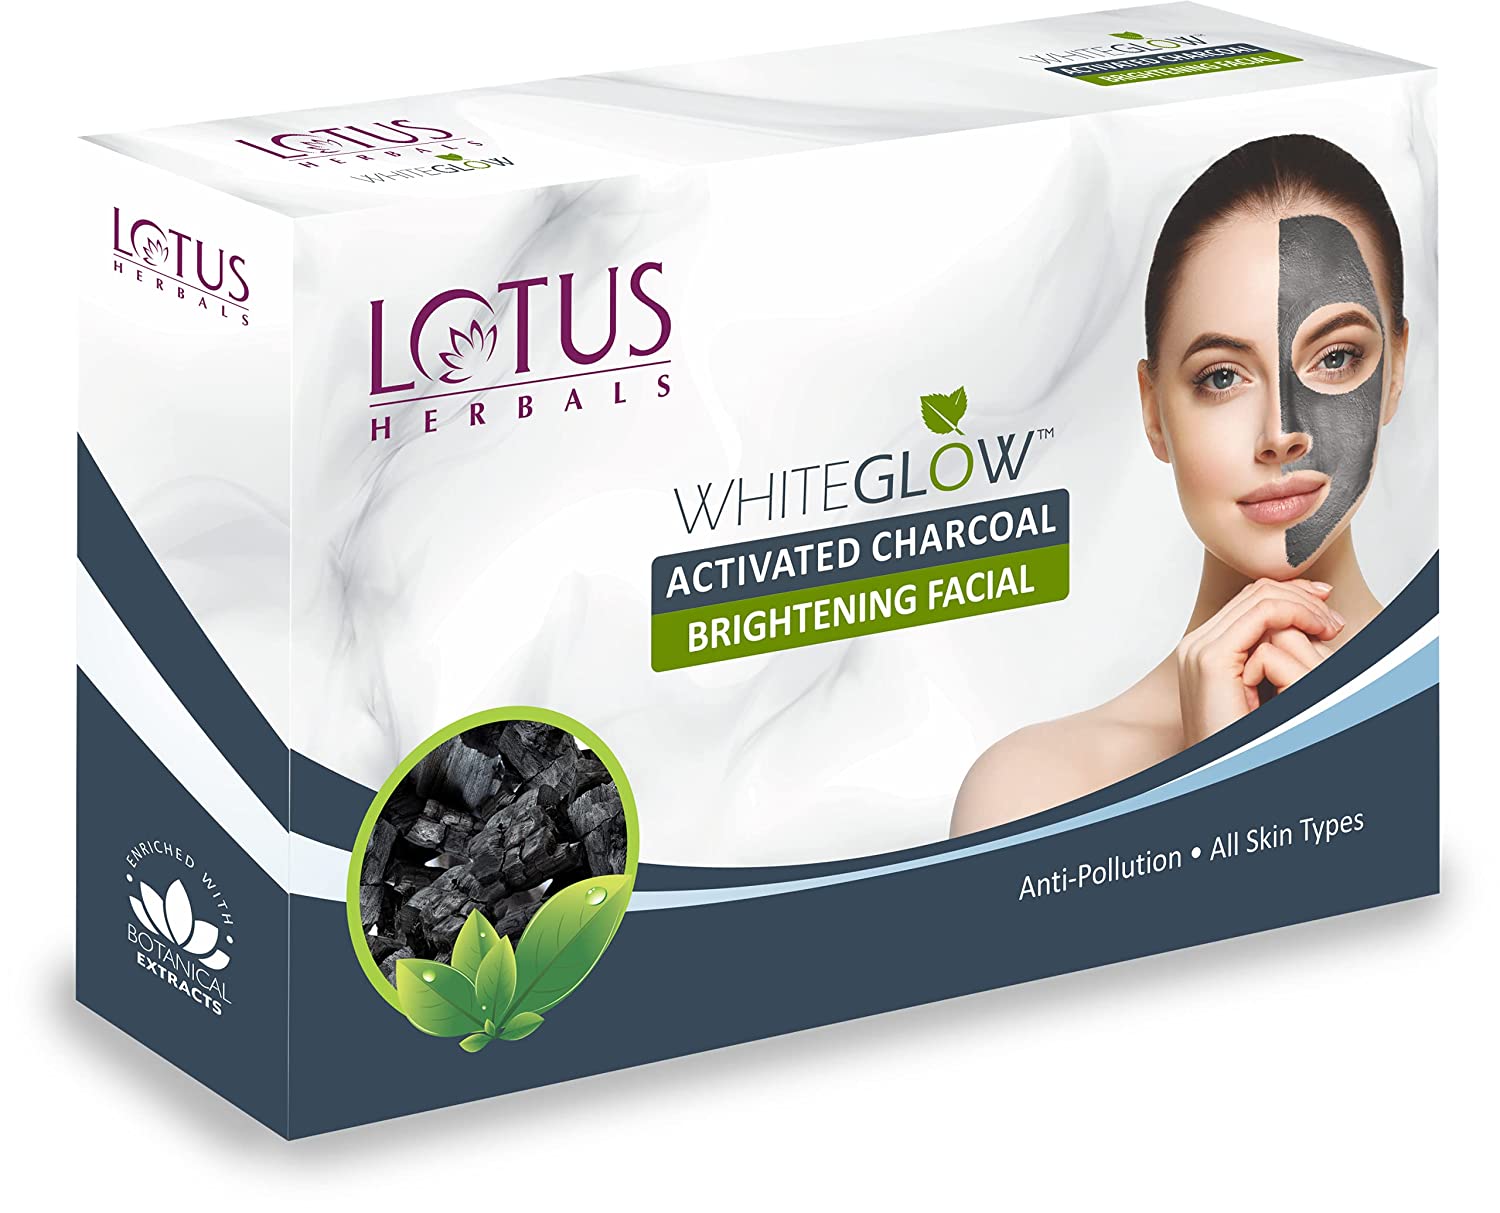 Lotus Herbals WhiteGlow Activated Charcoal Brightening 4 in 1 Facial Kit - 188 gm